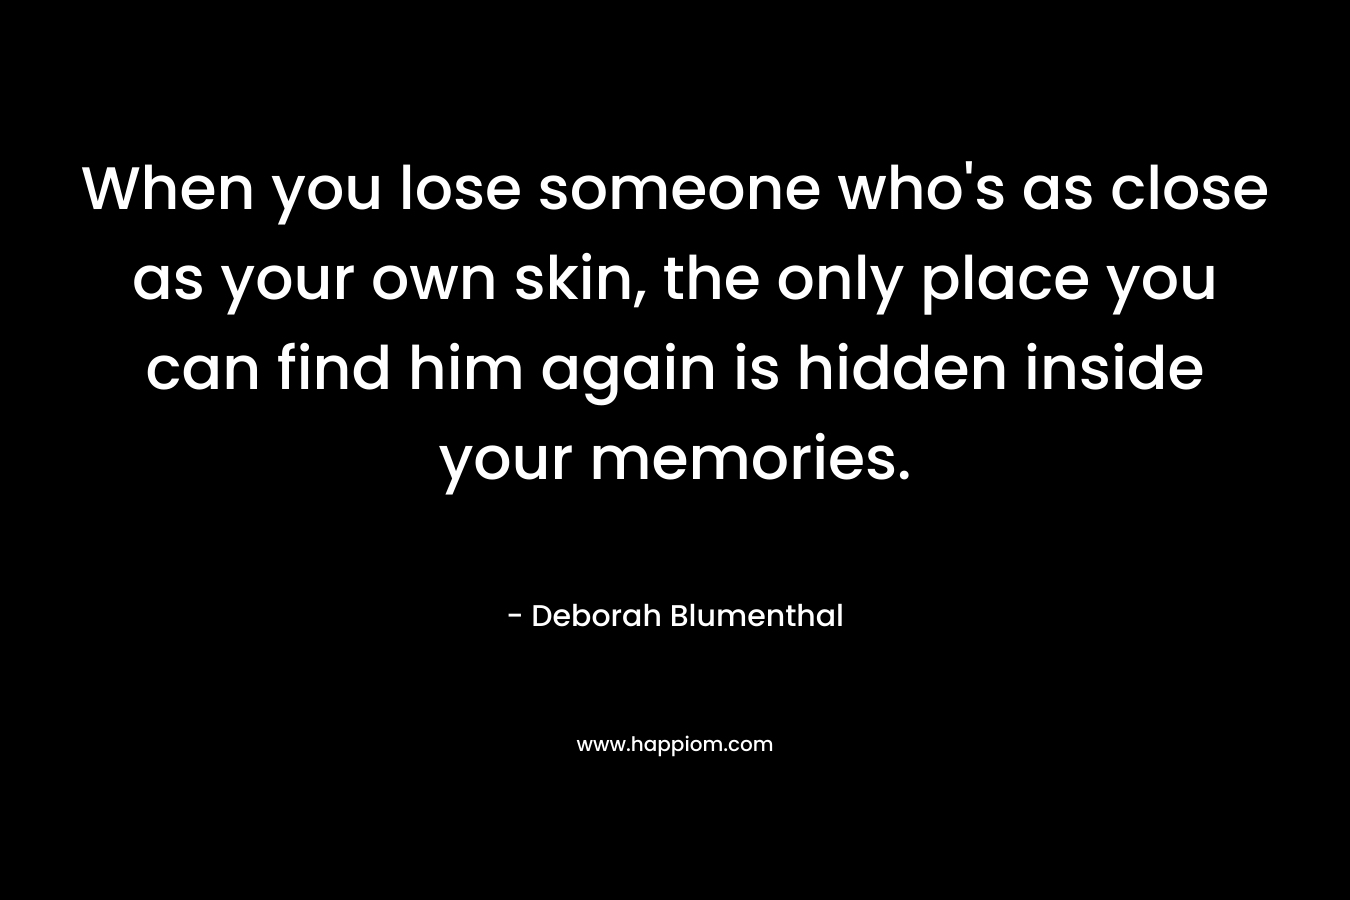 When you lose someone who’s as close as your own skin, the only place you can find him again is hidden inside your memories. – Deborah Blumenthal